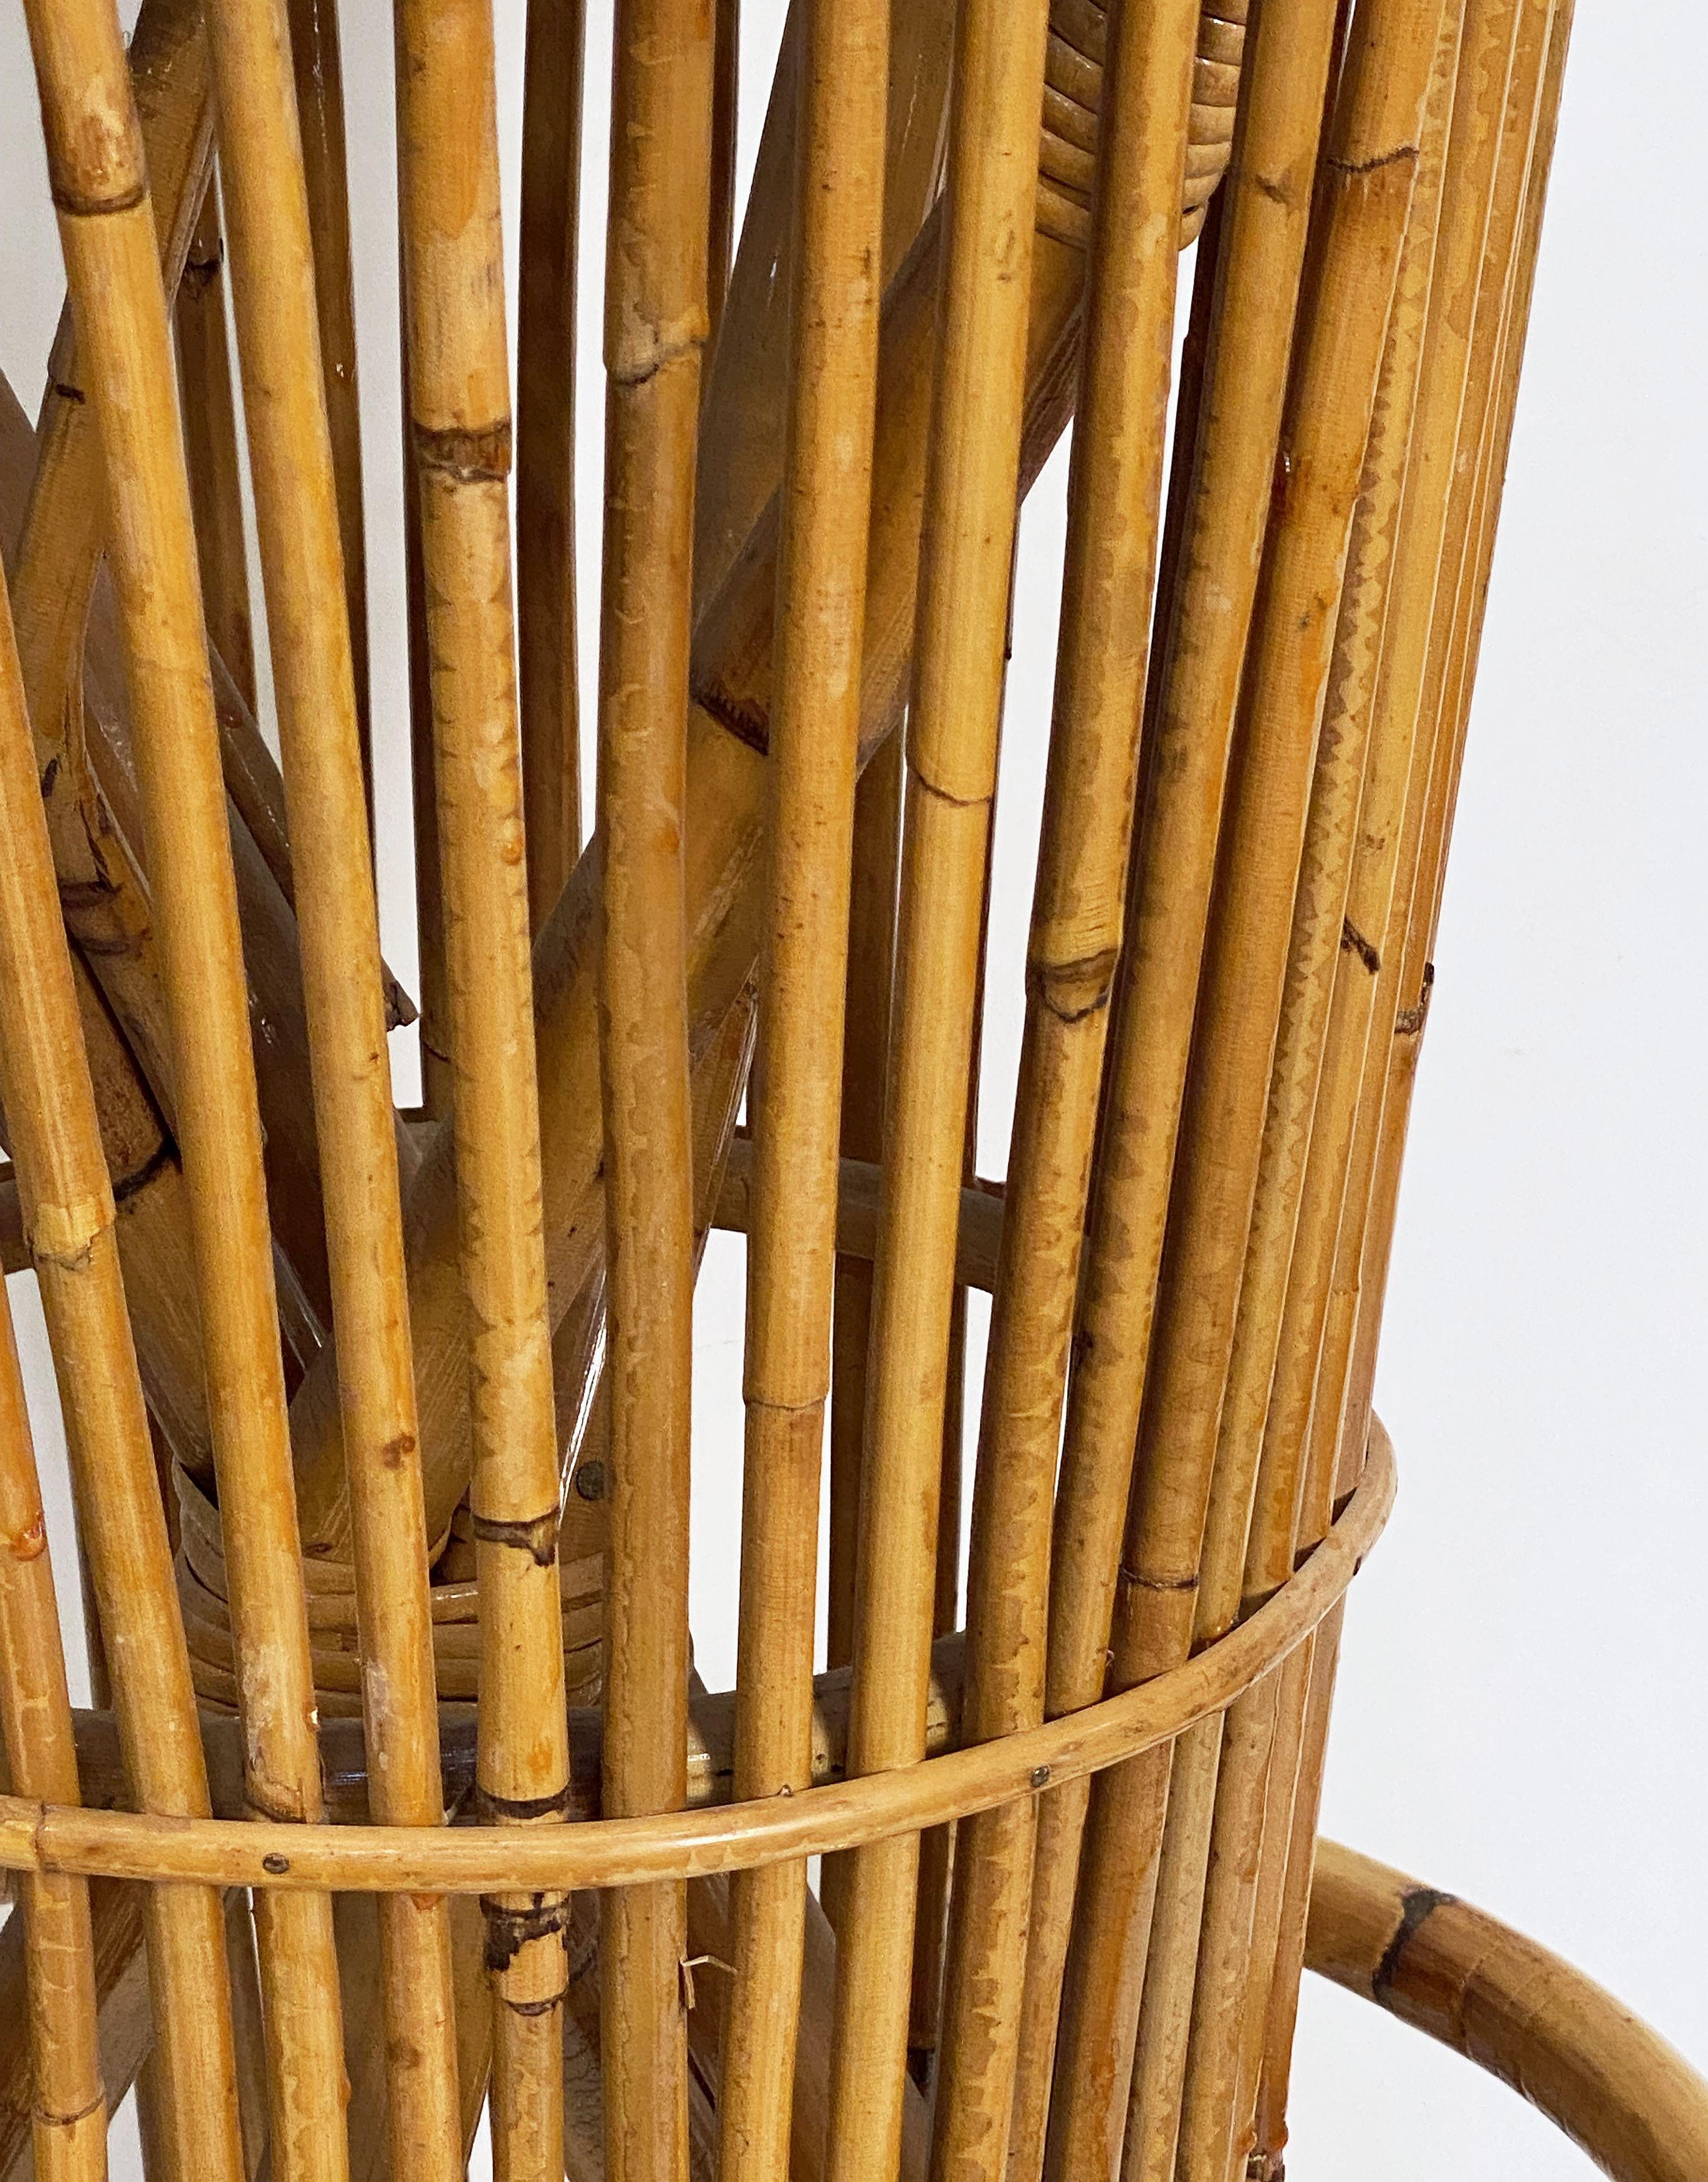 Italian Stool of Rattan and Bamboo from the Mid-20th Century For Sale 5